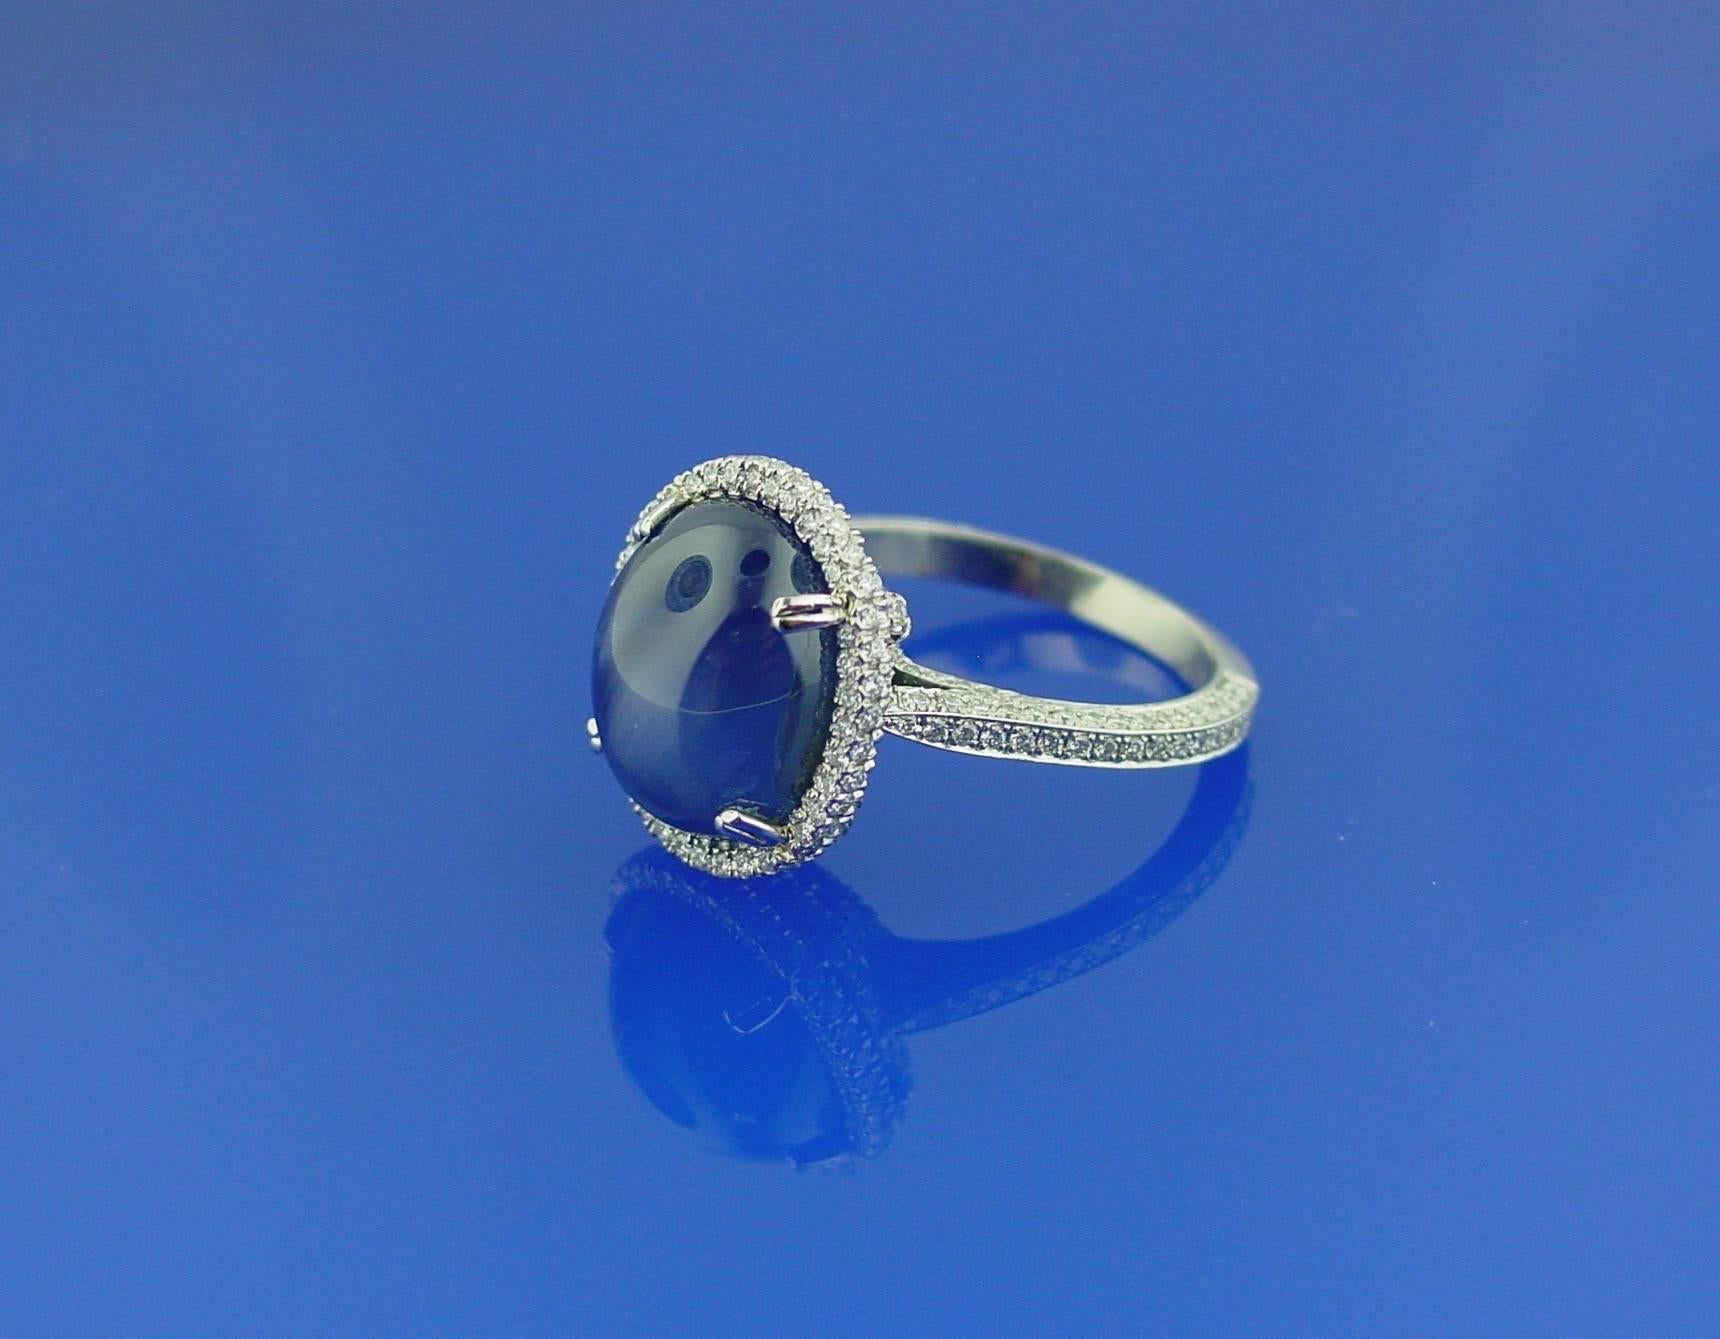 A  Cabochon Cut Star Sapphire Ring in a Platinum and Diamond Mounting. With a glamorous Art Deco feel, this contemporary ring features an 11.55 carat cabochon sapphire with AGTA Report #94014811 stating Burma (Myanmar), no heat . In a beautifully